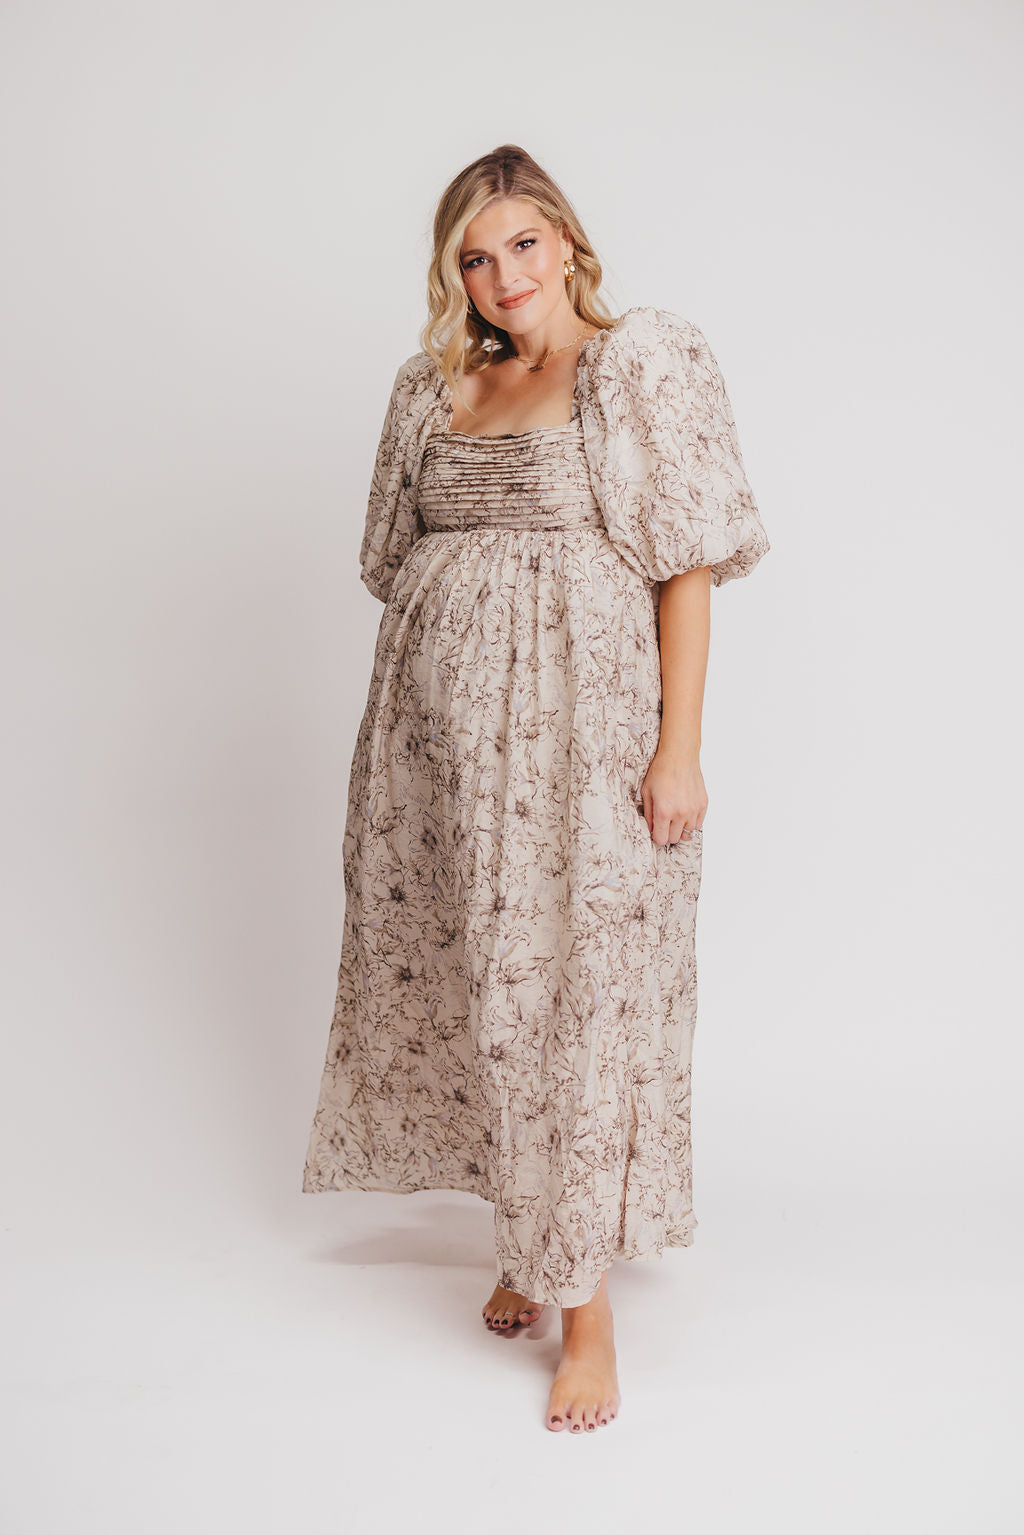 Melody Maxi Dress with Pleats and Bow Detail in Brown and Blue Floral - Bump Friendly & Inclusive Sizing (S-3XL) (Sale Dress of the Week $40 off!)